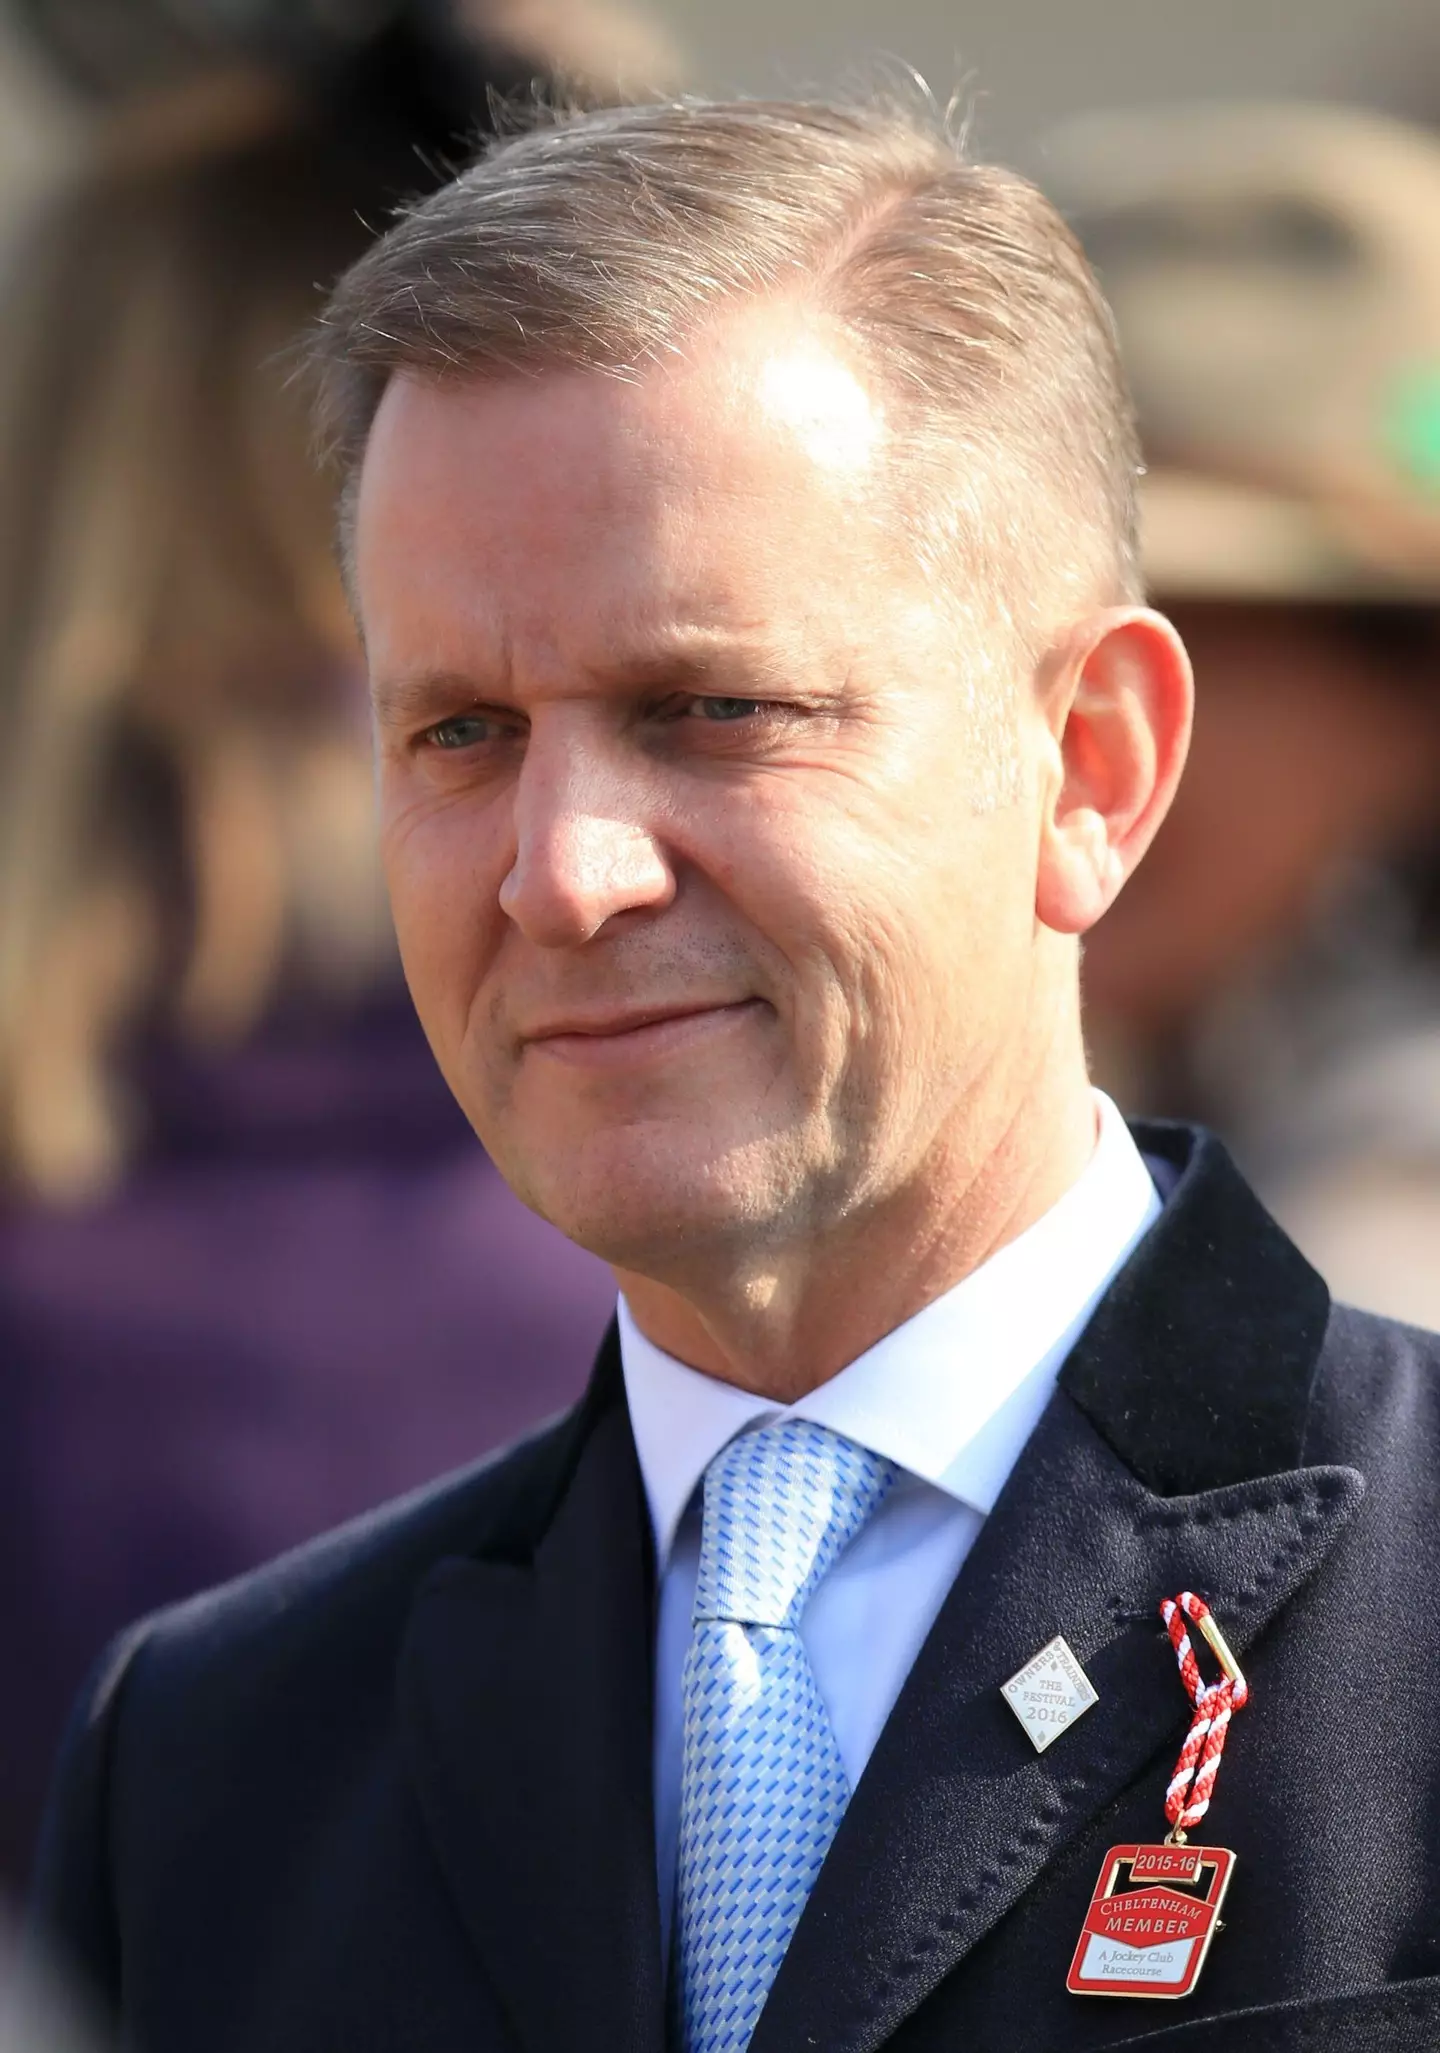 The Jeremy Kyle Show was axed in 2019.